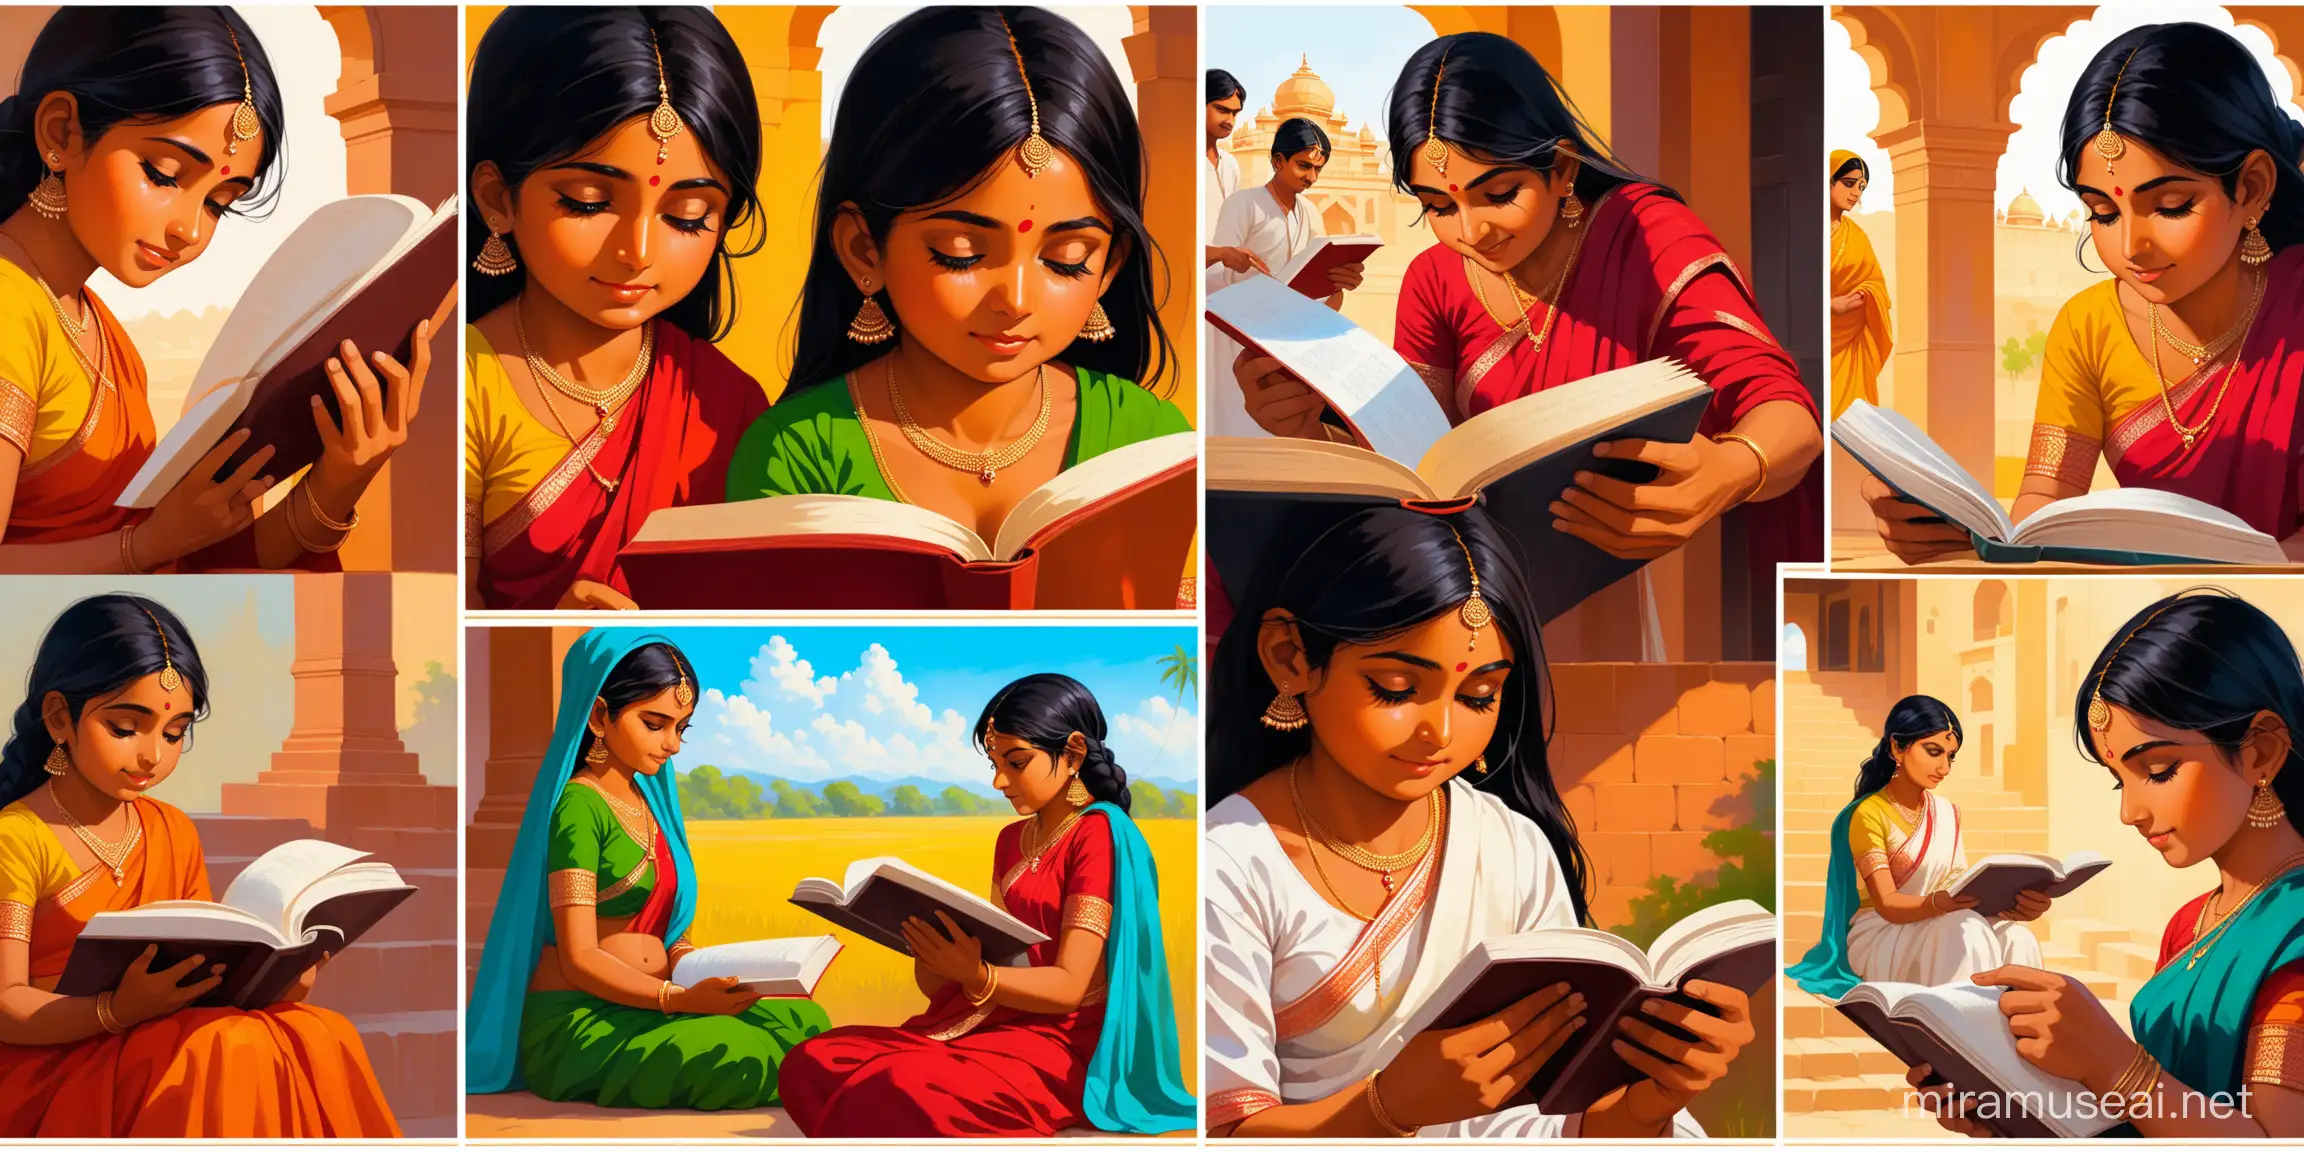 Colorful Oil Painting Collage of Indian People Reading Story Books